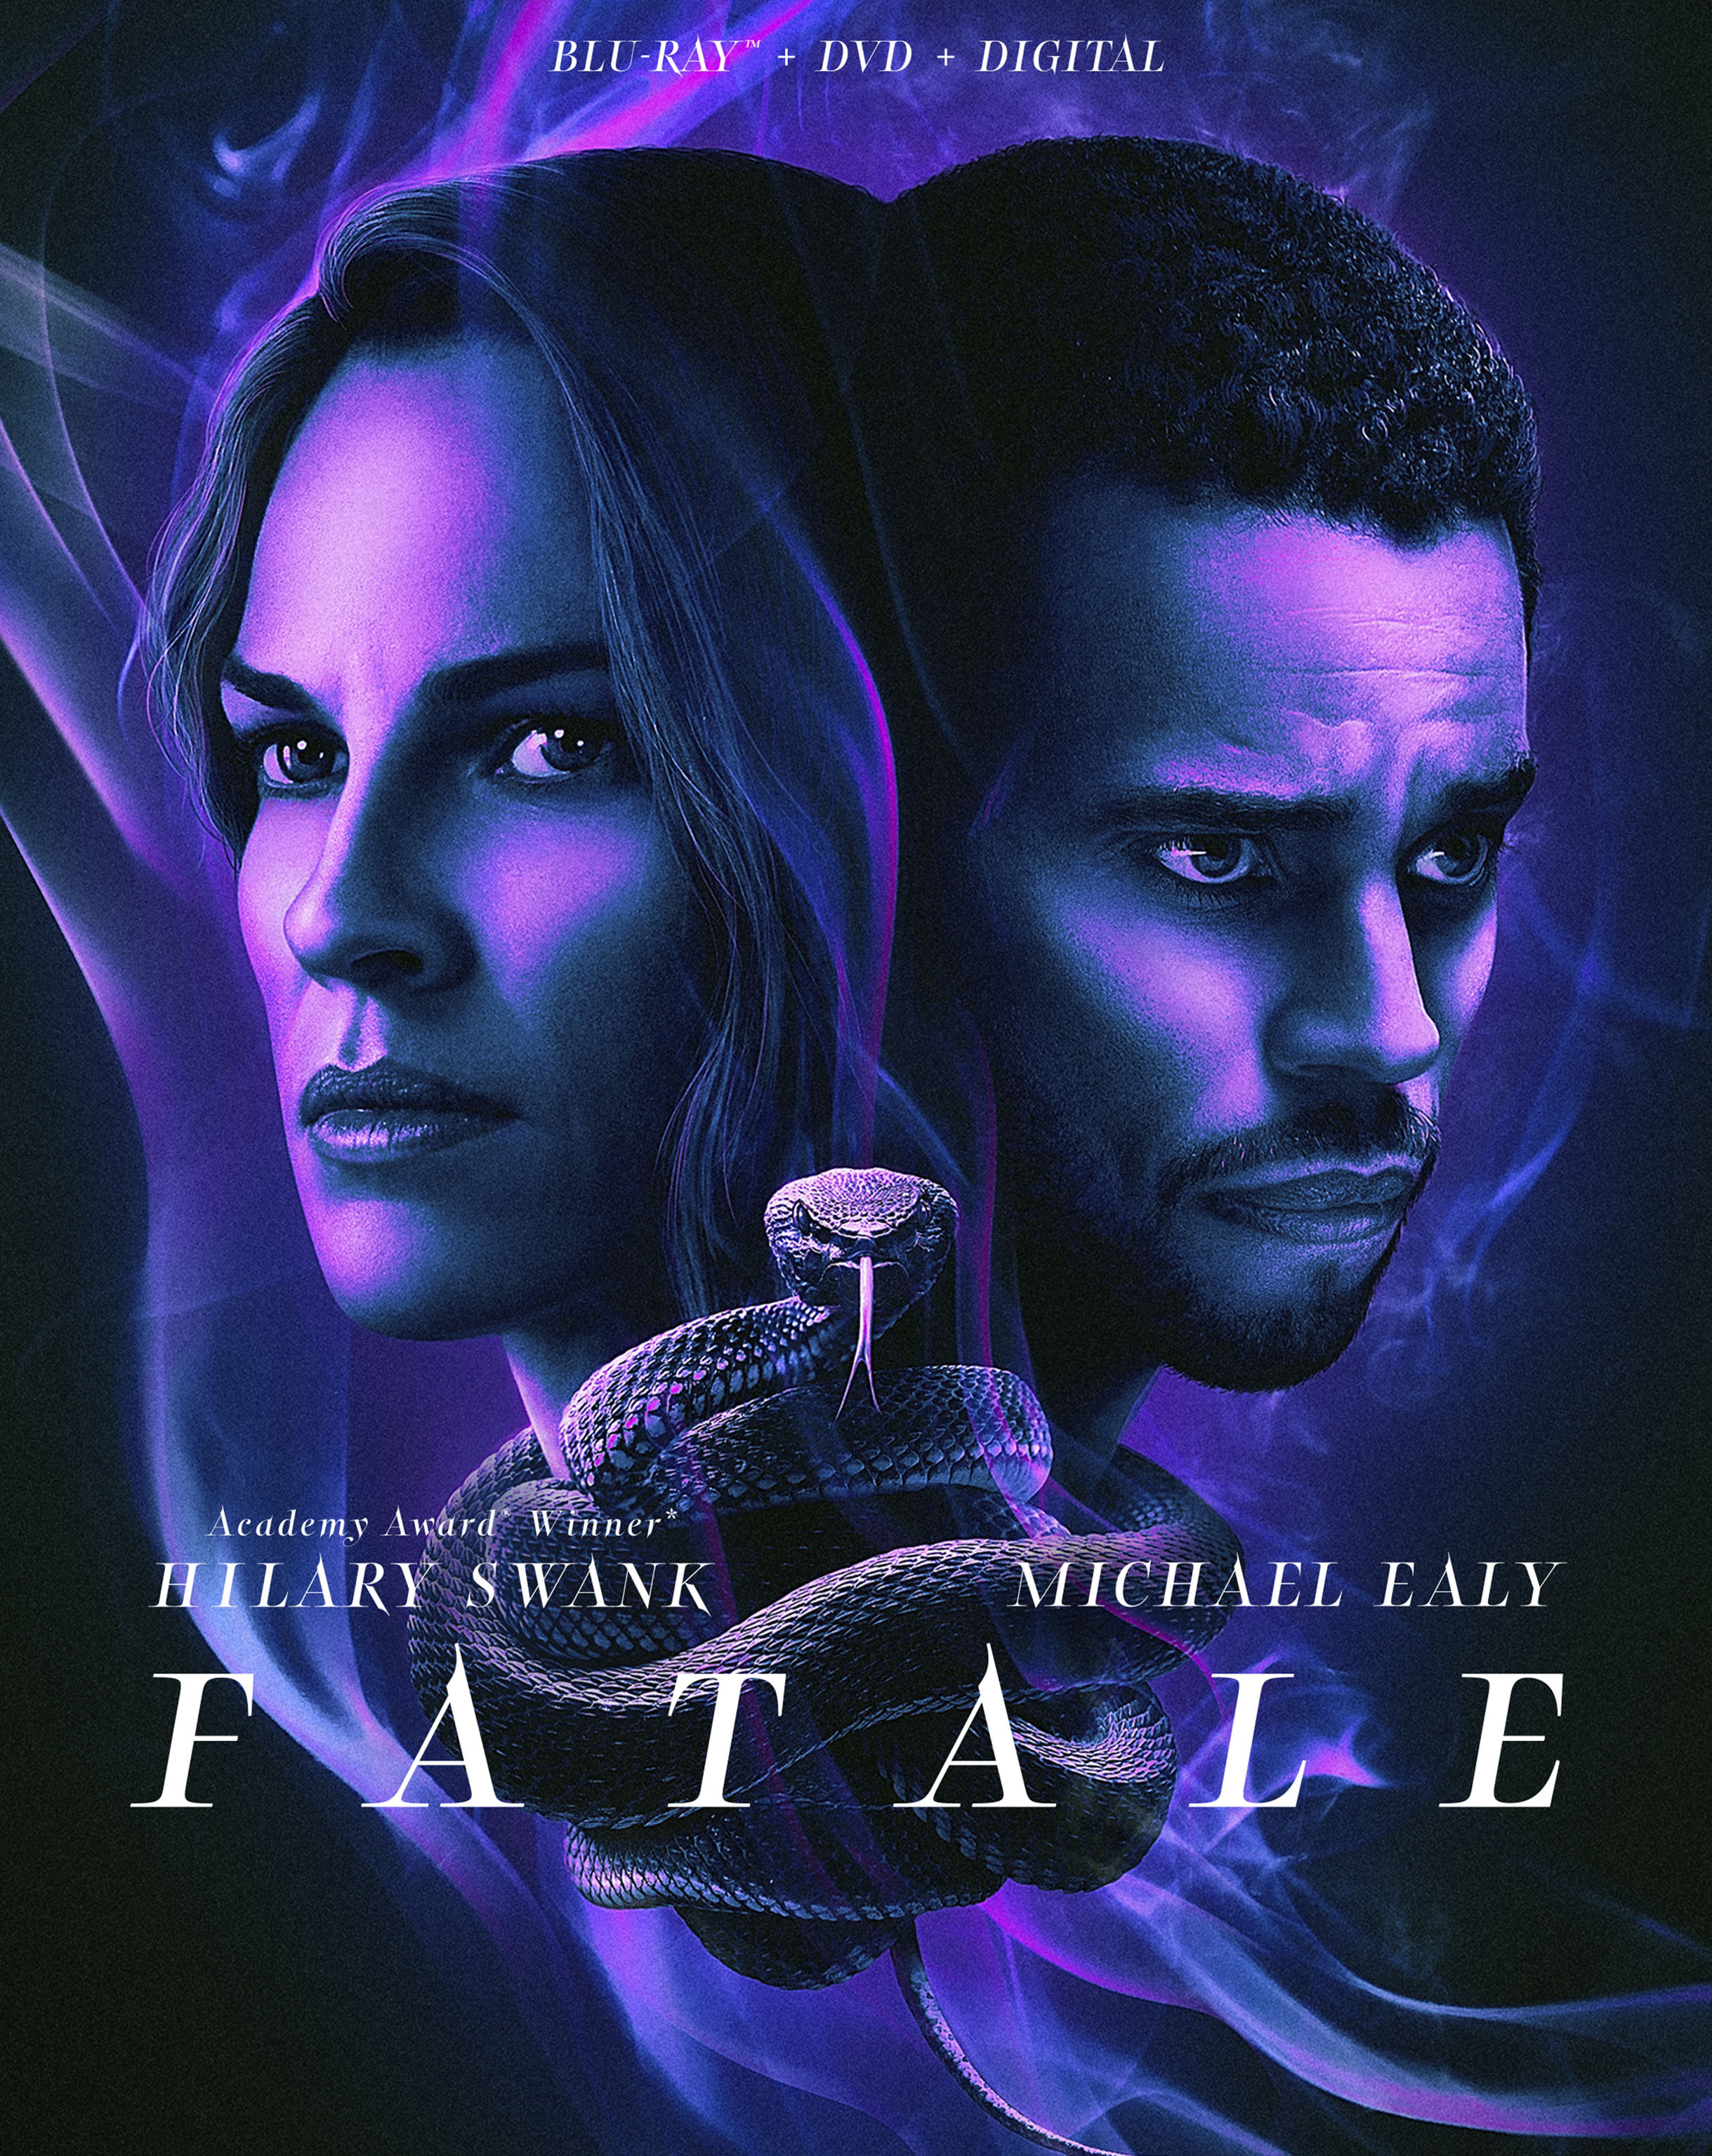 Fatale (with DVD And Digital Download) - Blu-ray [ 2020 ]  - Thriller Movies On Blu-ray - Movies On GRUV